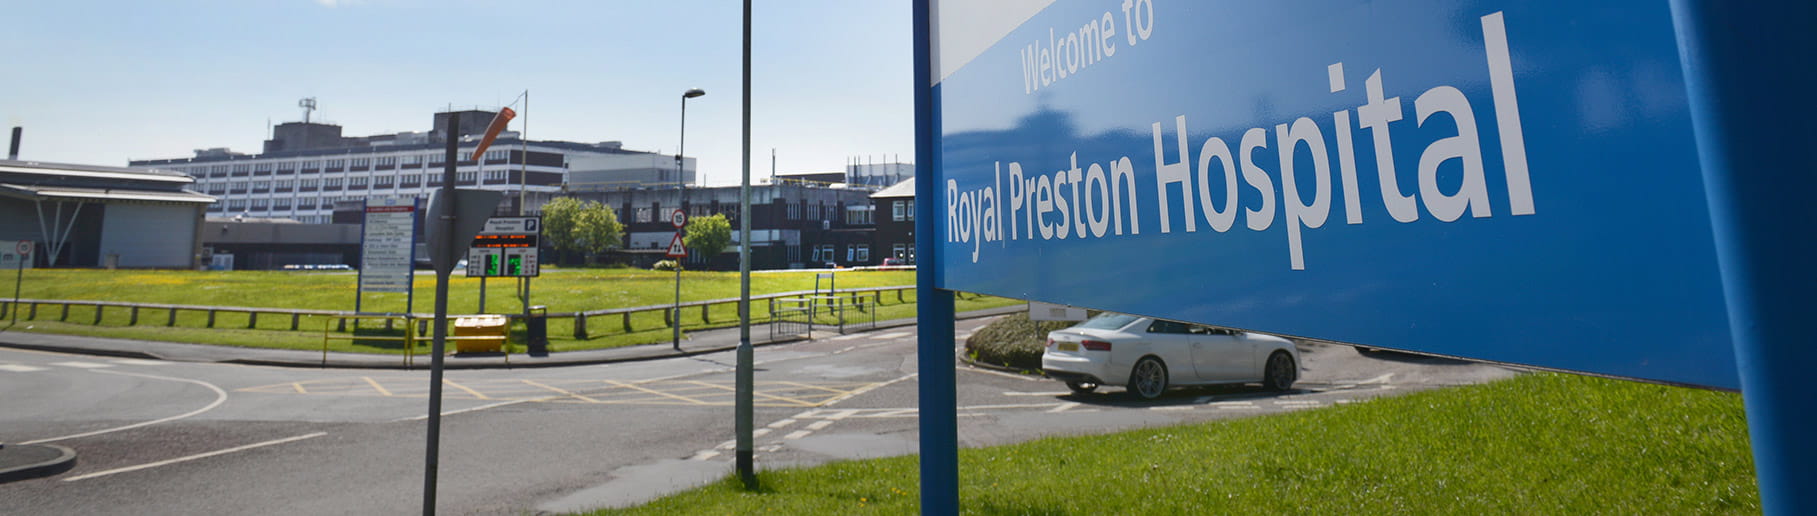 Royal Preston Hospital seen from the outside